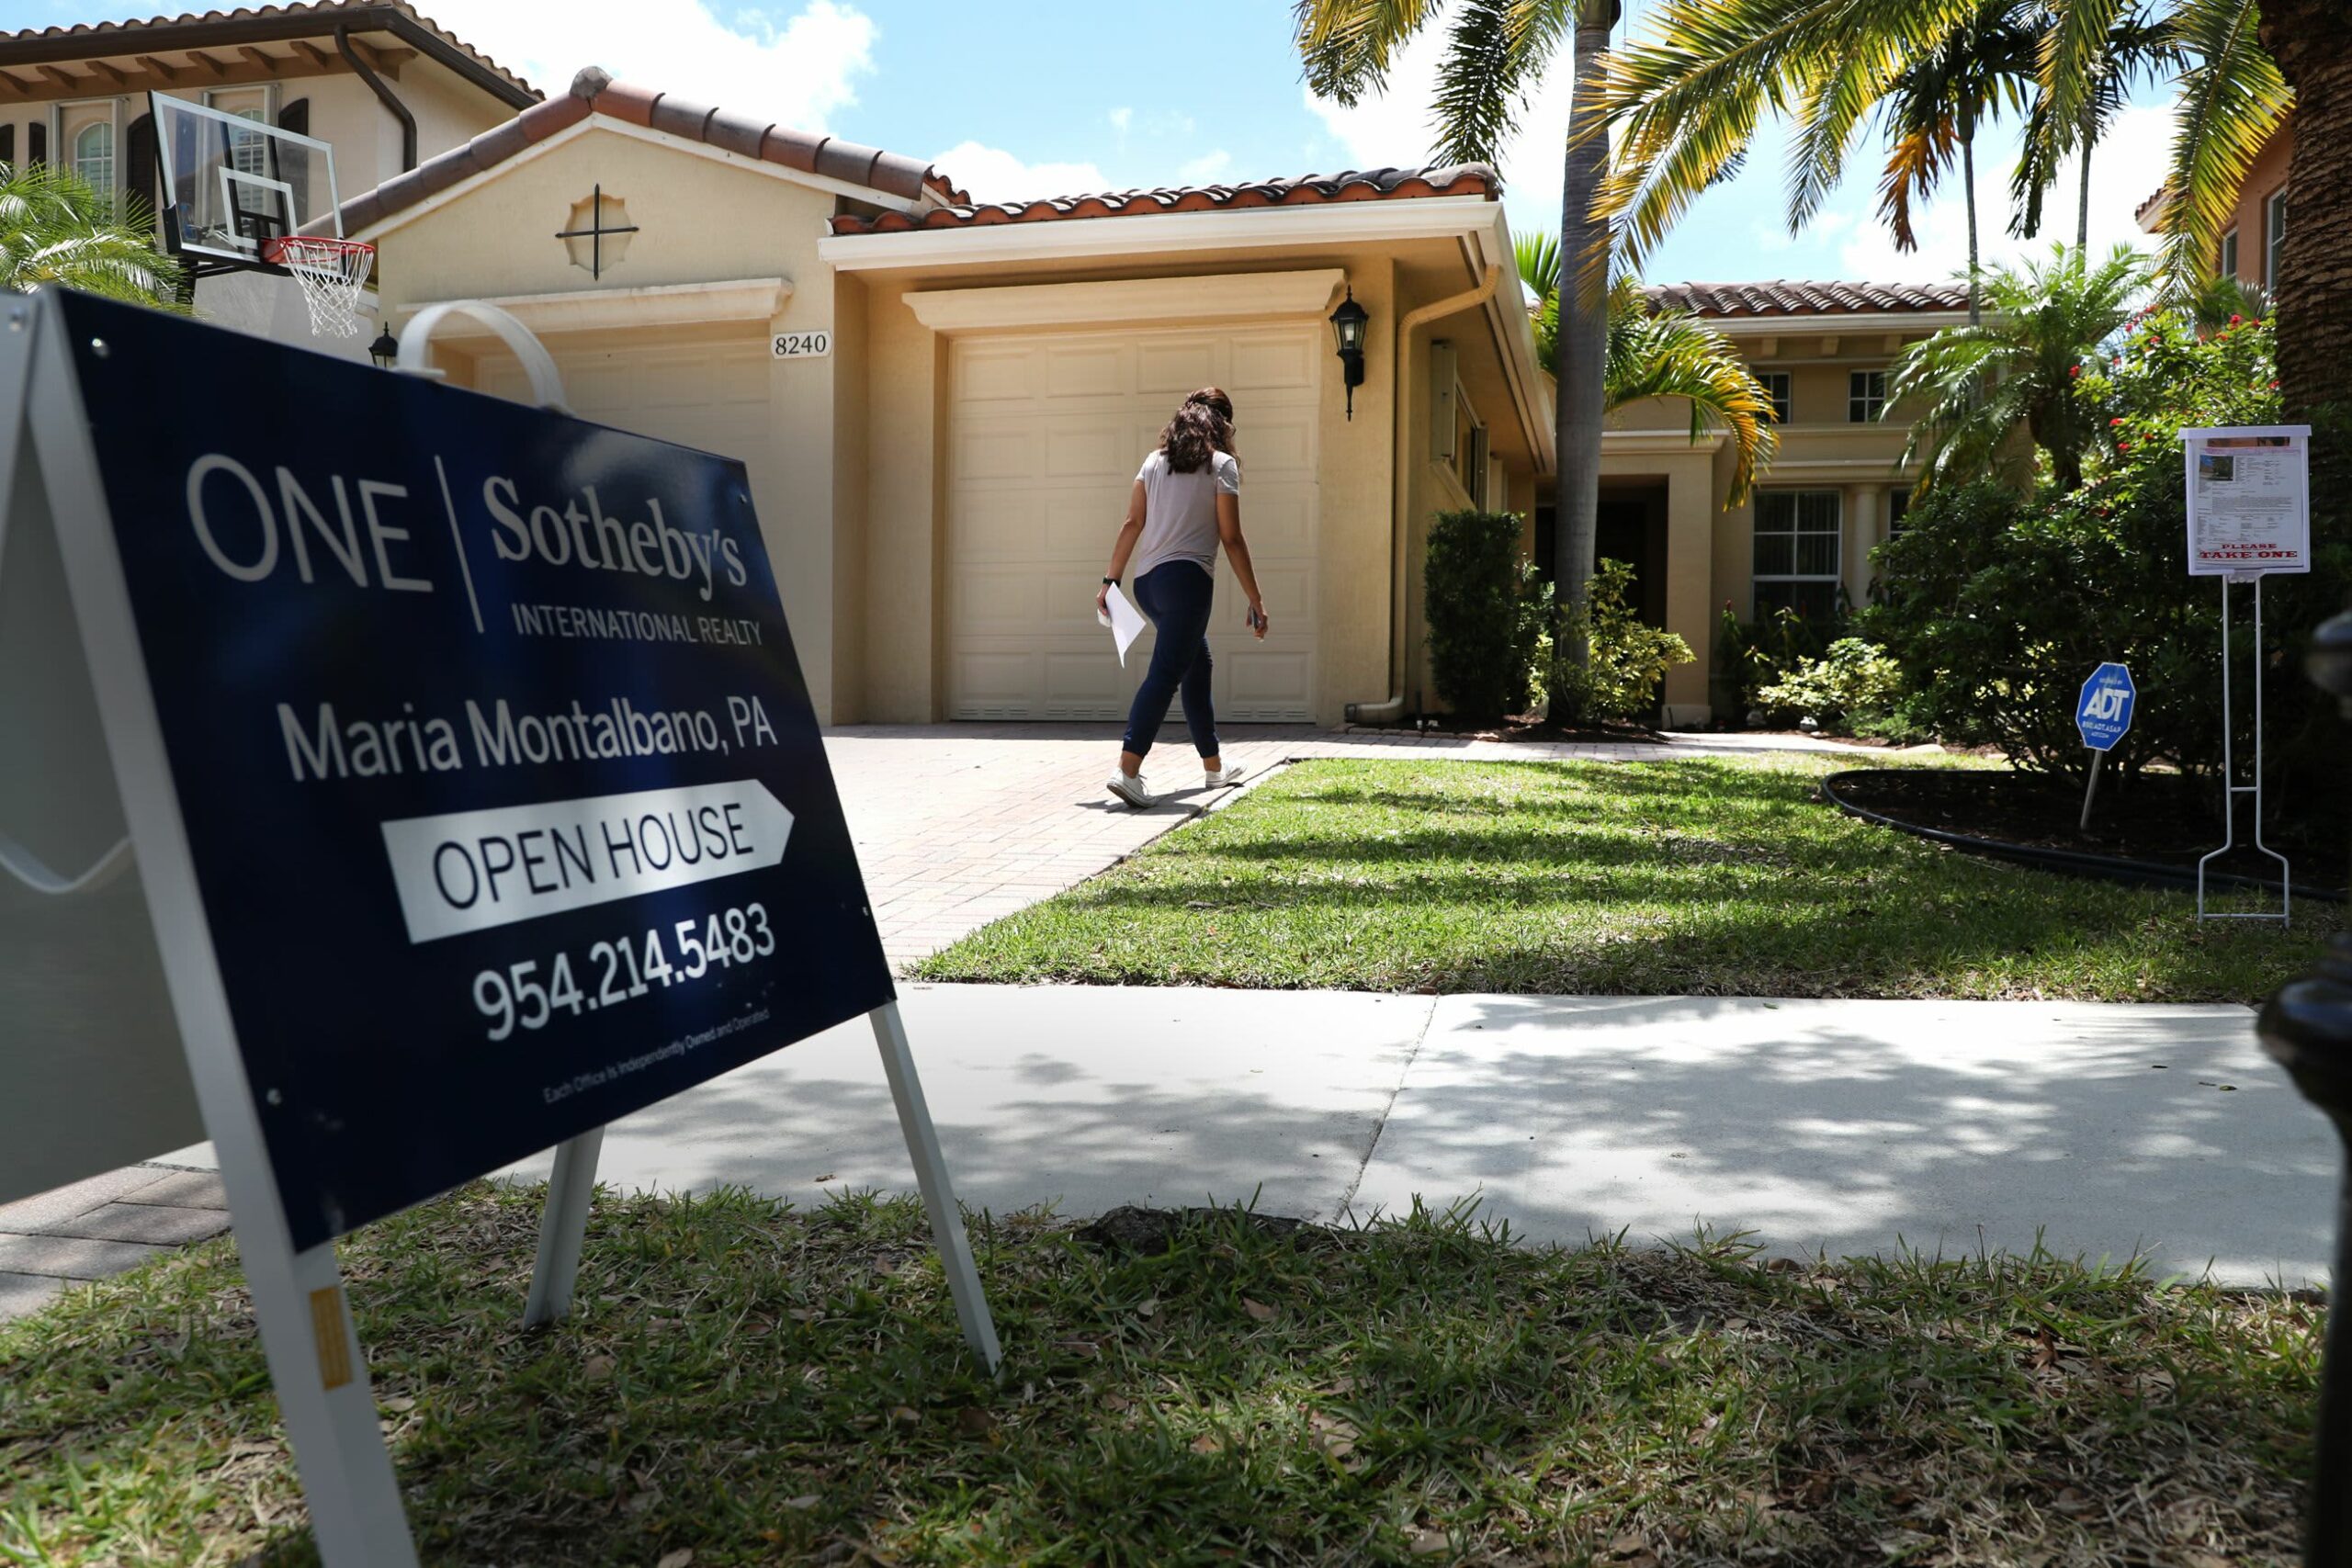 Home price declines may be over, S&P Case-Shiller says